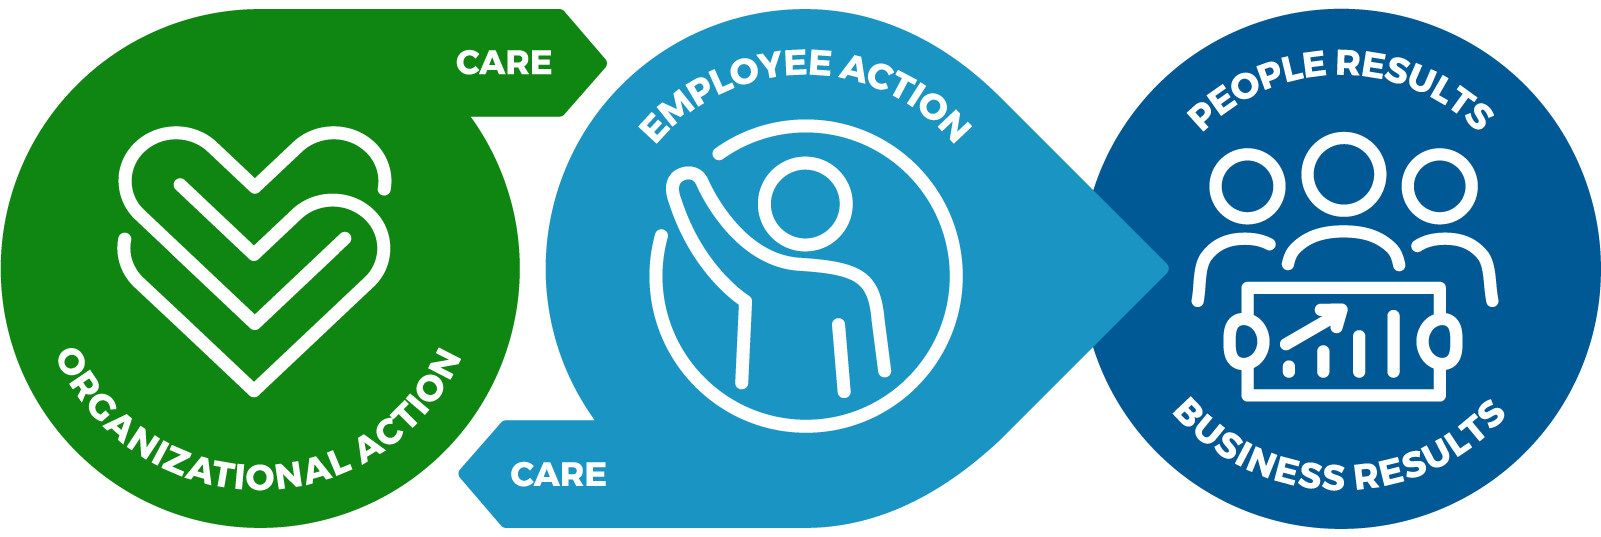 The Limeade Results Models shows the cycle of organizations taking care and action for employees, which comes back in return. The final outcome is improved people and business results.